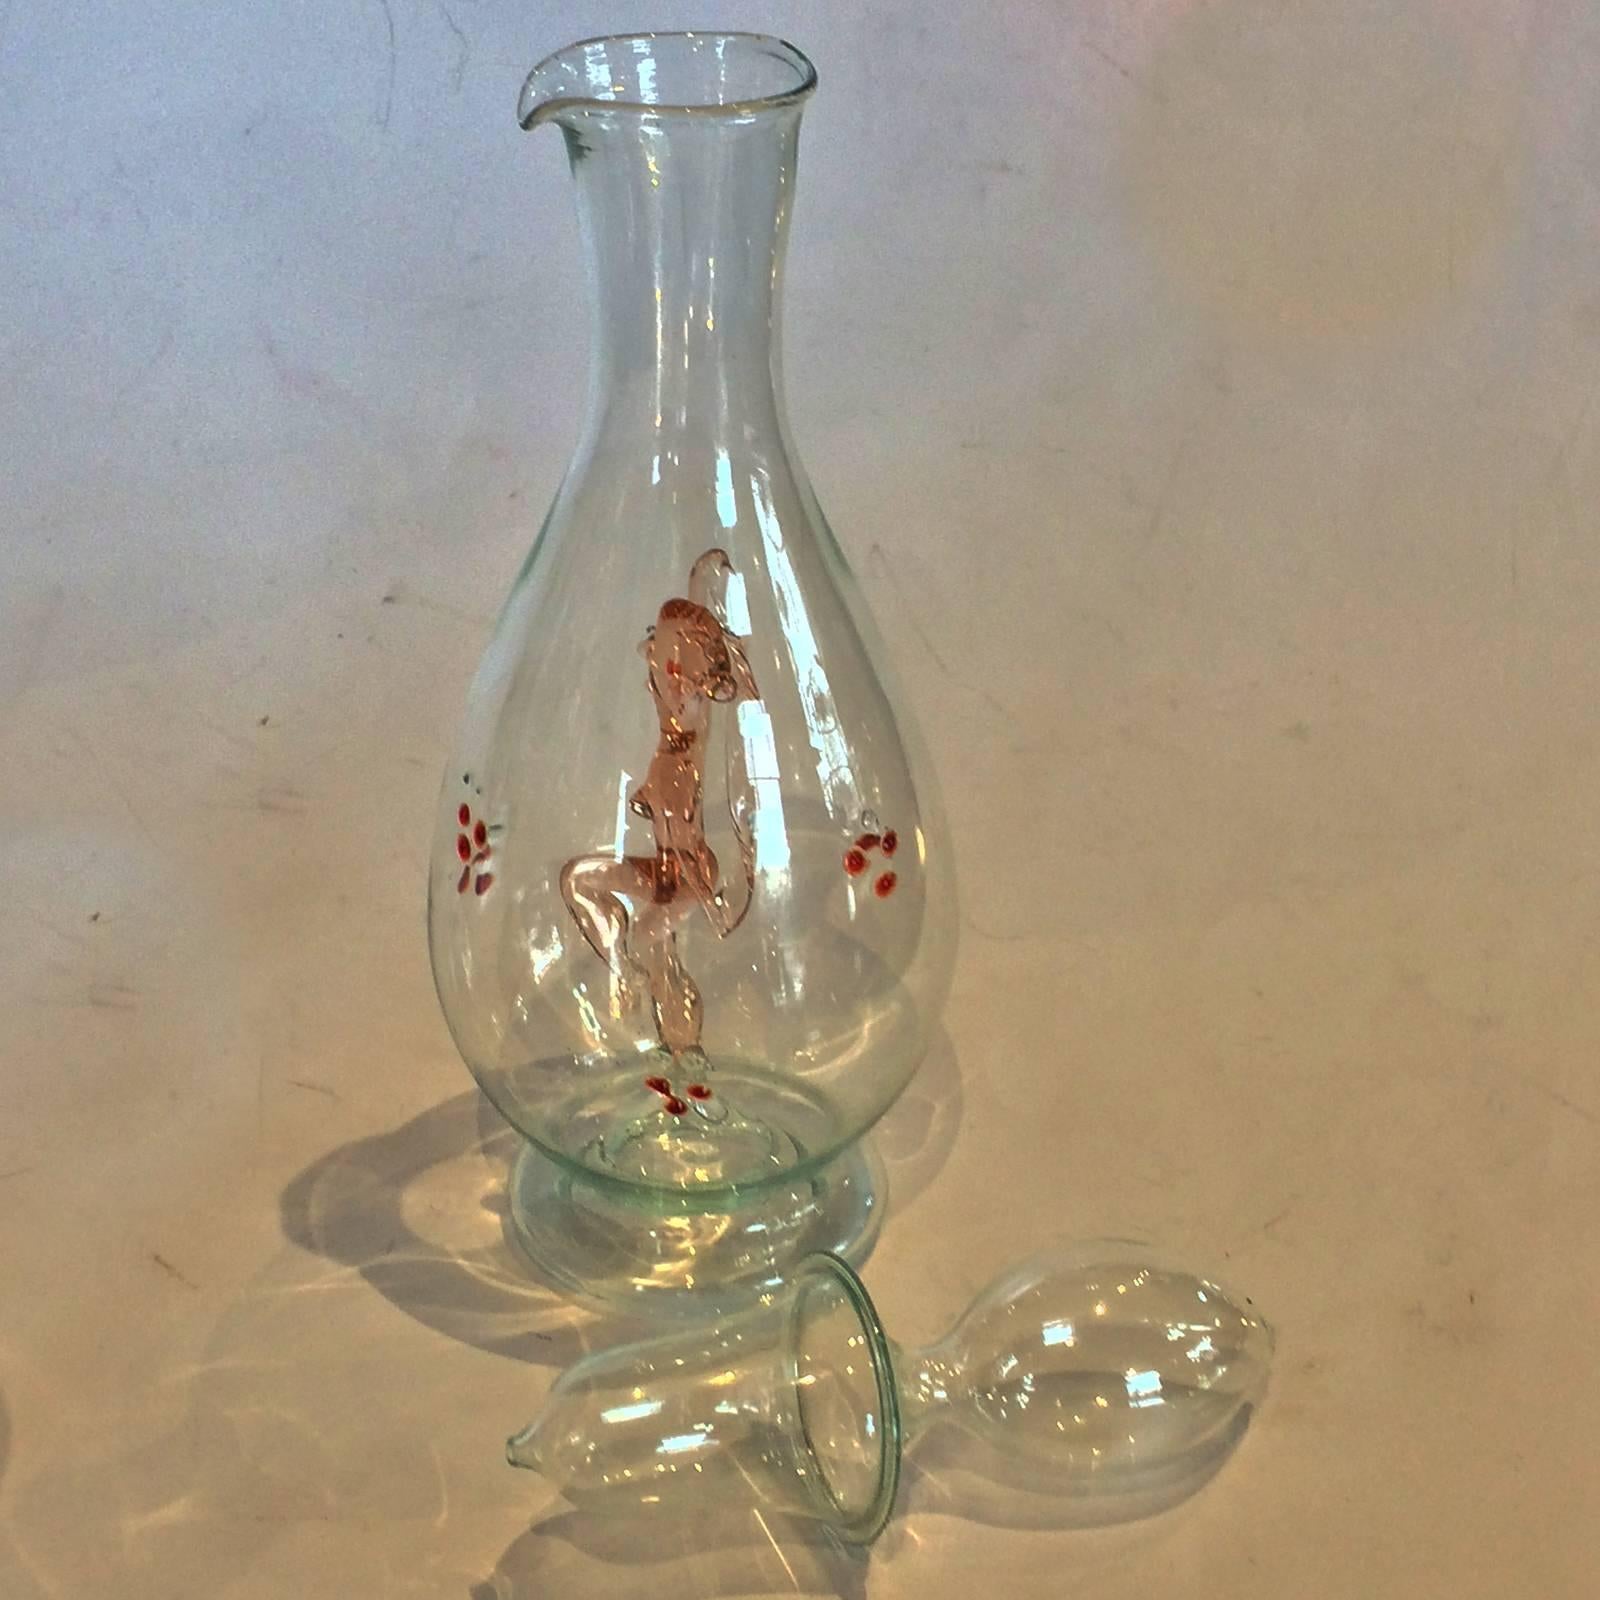 Art Deco Lauscha Bimini Werkstatte Decanter set. “Batchelor” set, featuring flask, stopper and pair set of goblets. Each of these amazing glass sets are individually made and no two sets are ever the same. This set is in the clear glass with the